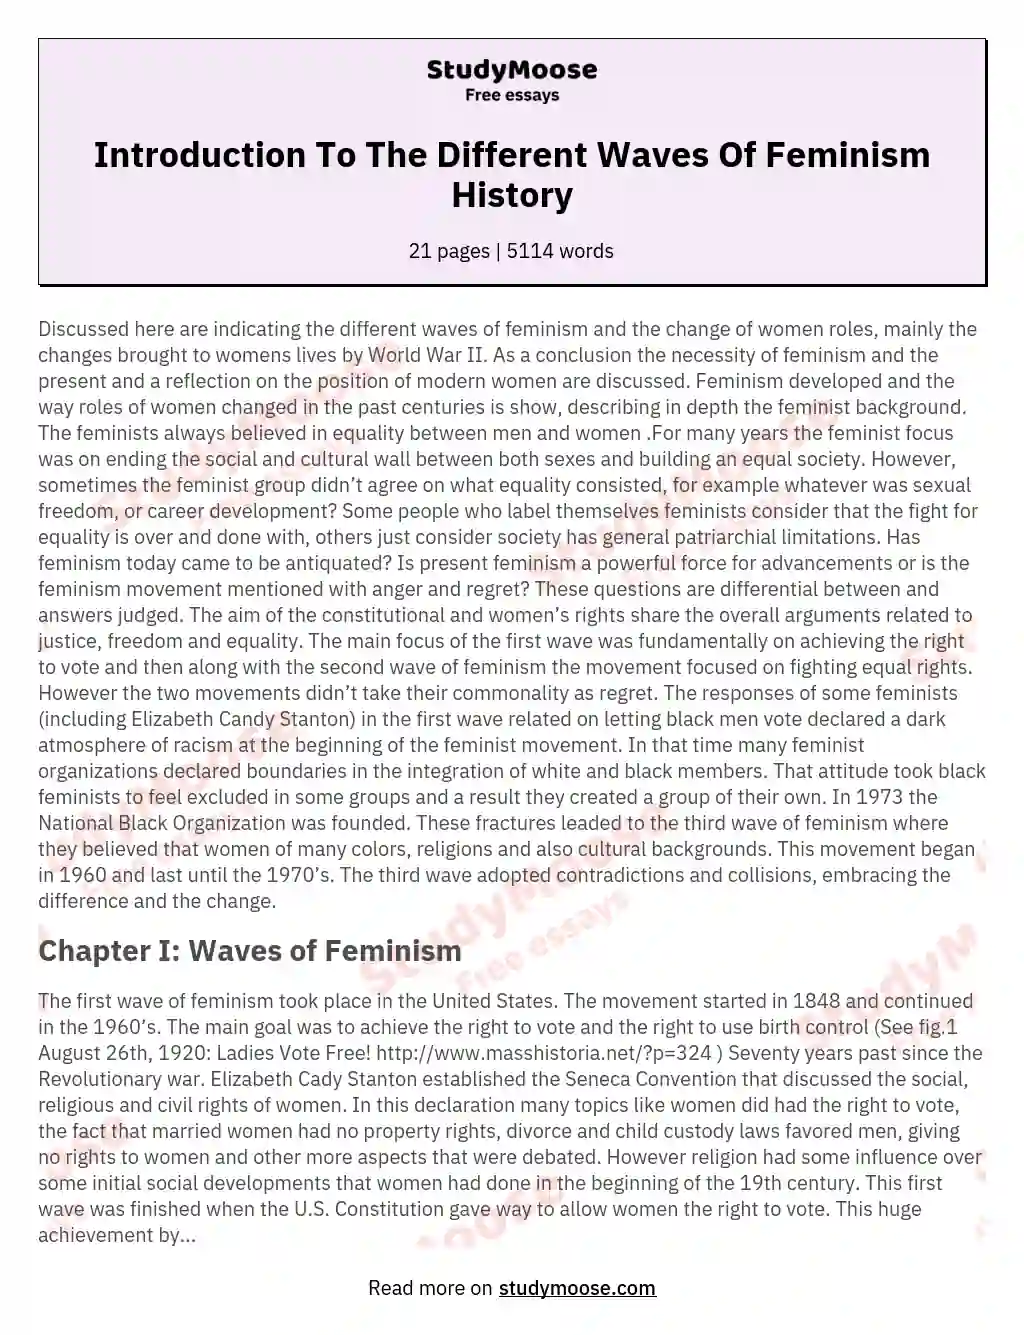 Introduction To The Different Waves Of Feminism History